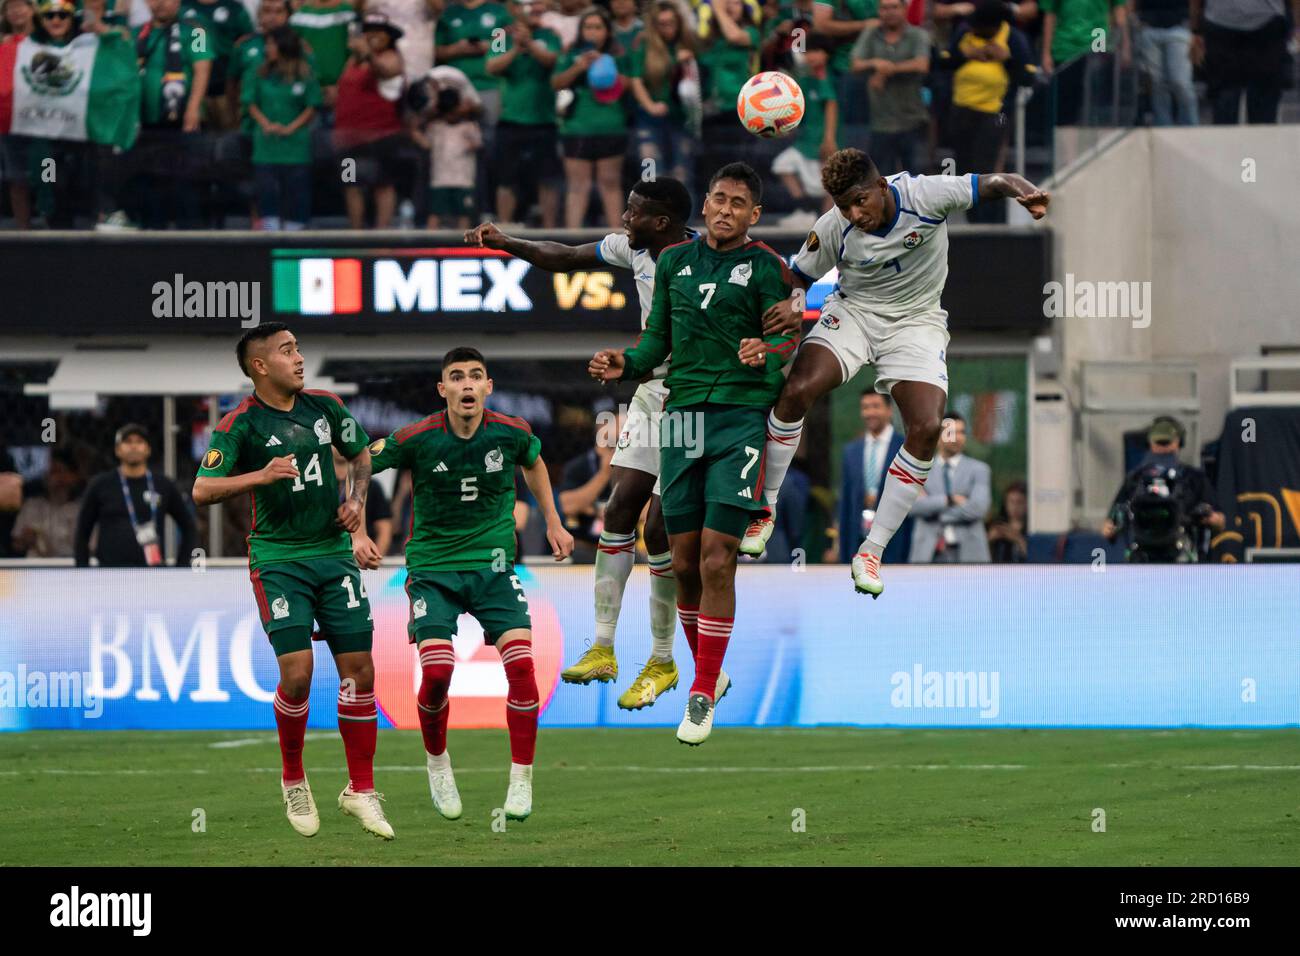 Panama defender Fidel Escobar (4) wins a header against Mexico midfielder Luis Romo (7) during the Concacaf 2023 Gold Cup final, Sunday, July 16, 2023 Stock Photo